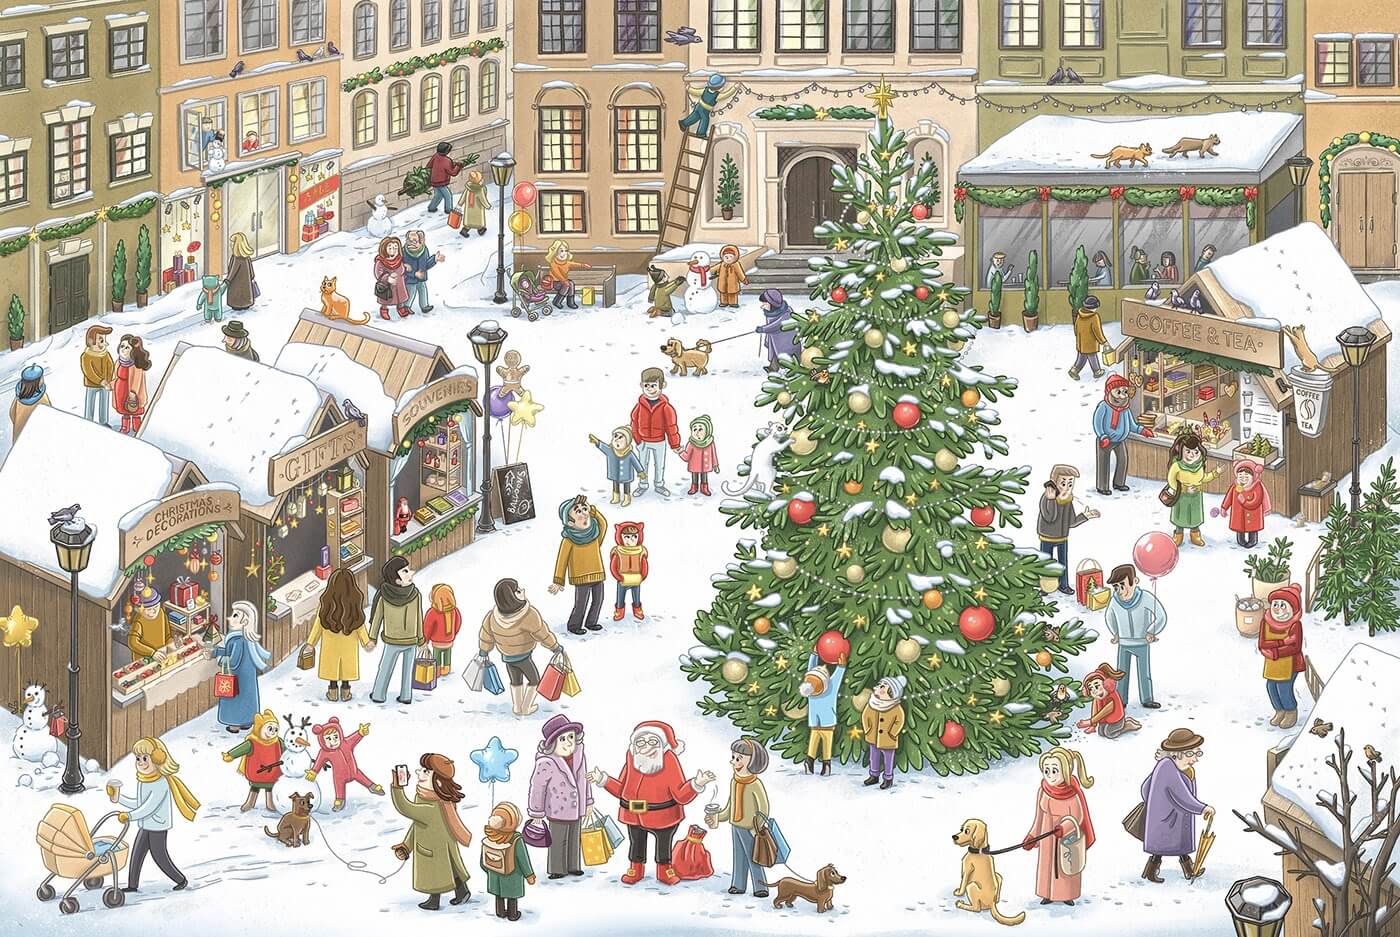 Christmas Day Illustration in Town by Leia Pentskofer